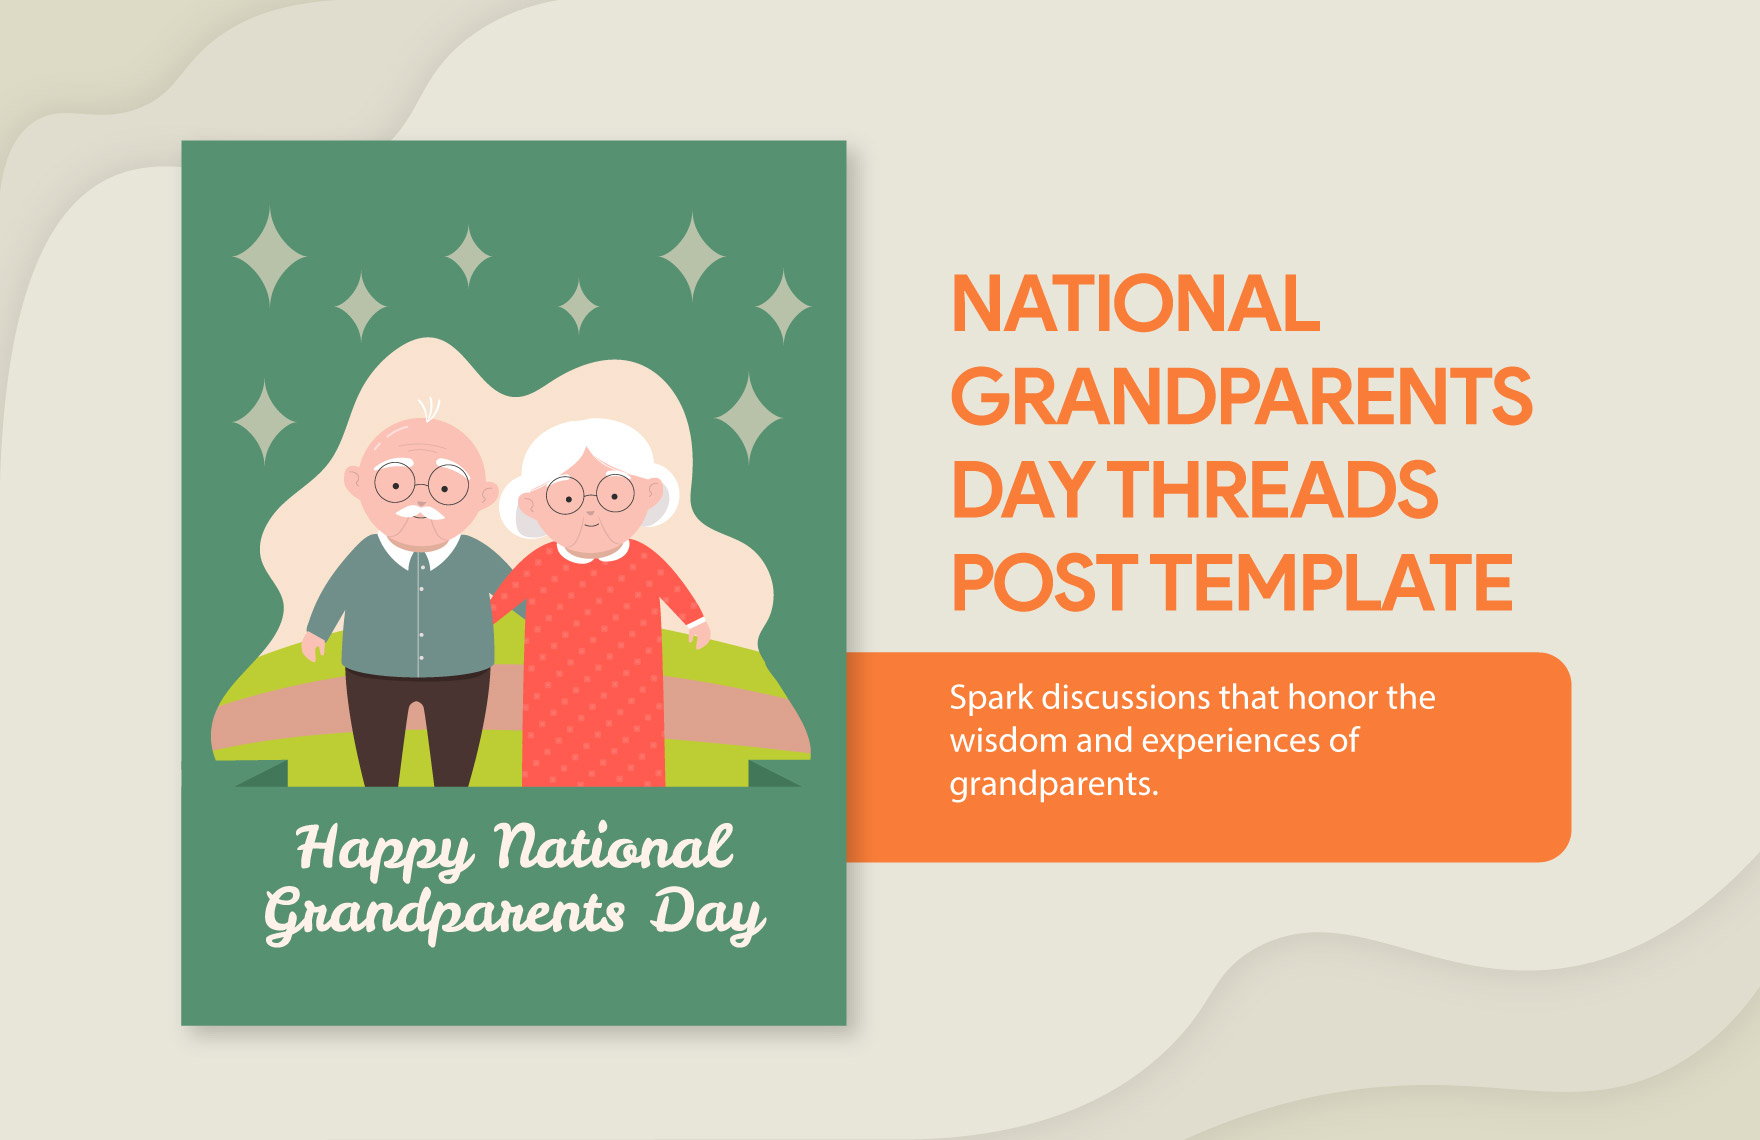 Free National Grandparents Day Threads Post Template in Illustrator, PSD, PNG